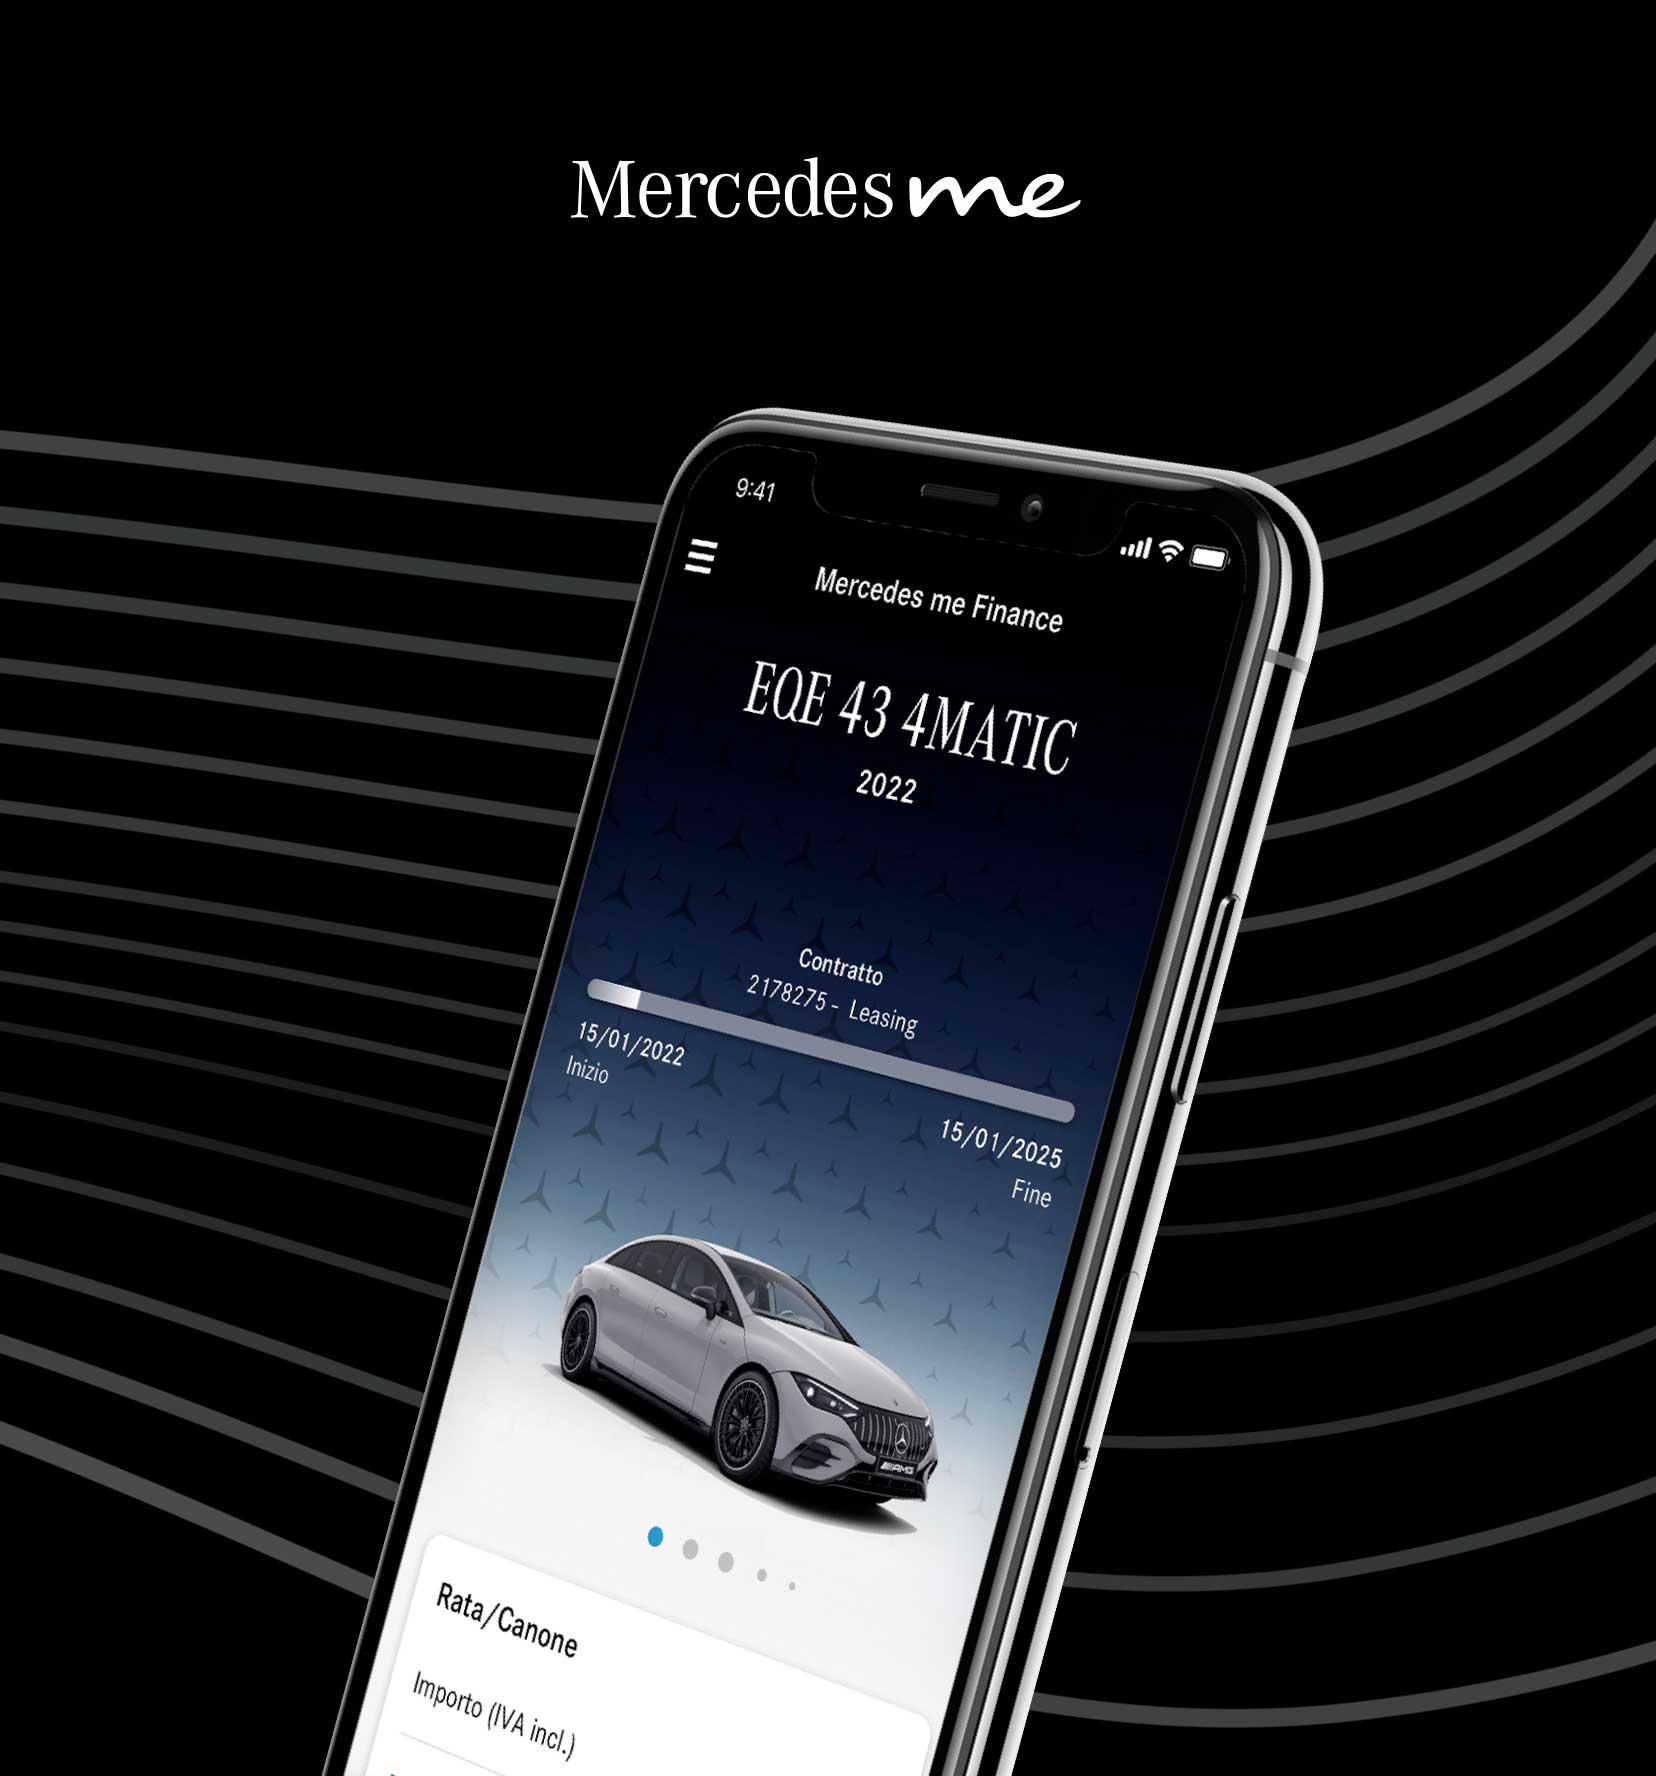 Mercedes Me Finance is a new app from Mercedes-Benz